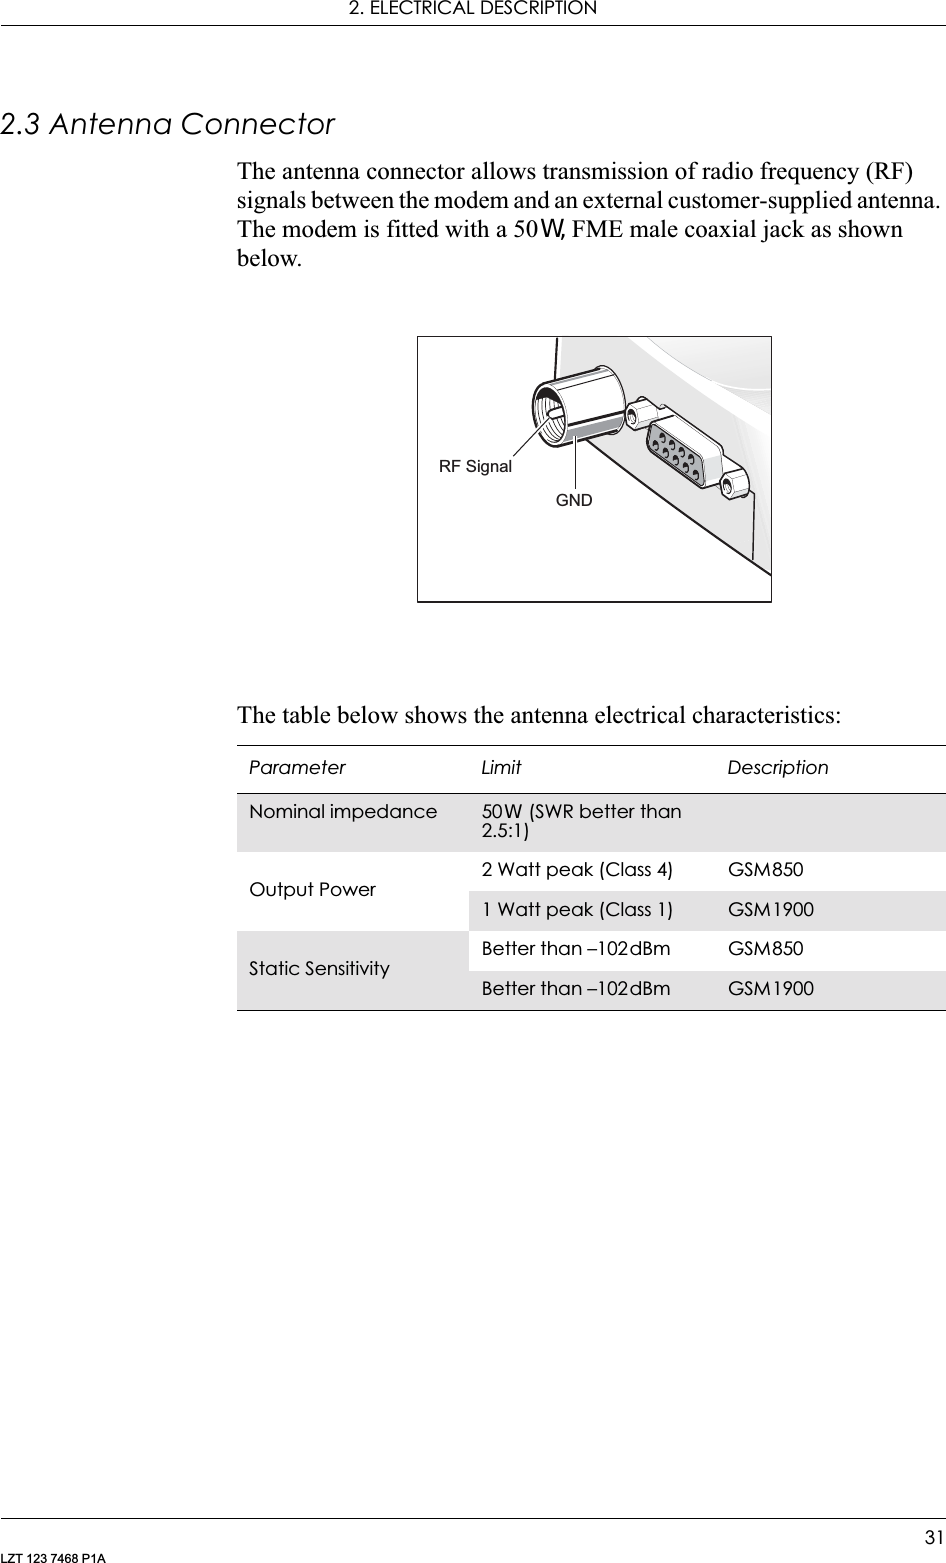 2. ELECTRICAL DESCRIPTION31LZT 123 7468 P1A2.3 Antenna ConnectorThe antenna connector allows transmission of radio frequency (RF) signals between the modem and an external customer-supplied antenna. The modem is fitted with a 50: FME male coaxial jack as shown below.The table below shows the antenna electrical characteristics:Parameter Limit DescriptionNominal impedance 50: (SWR better than 2.5:1)Output Power2 Watt peak (Class 4) GSM8501 Watt peak (Class 1) GSM1900Static SensitivityBetter than –102dBm GSM850Better than –102dBm GSM1900GNDRF Signal